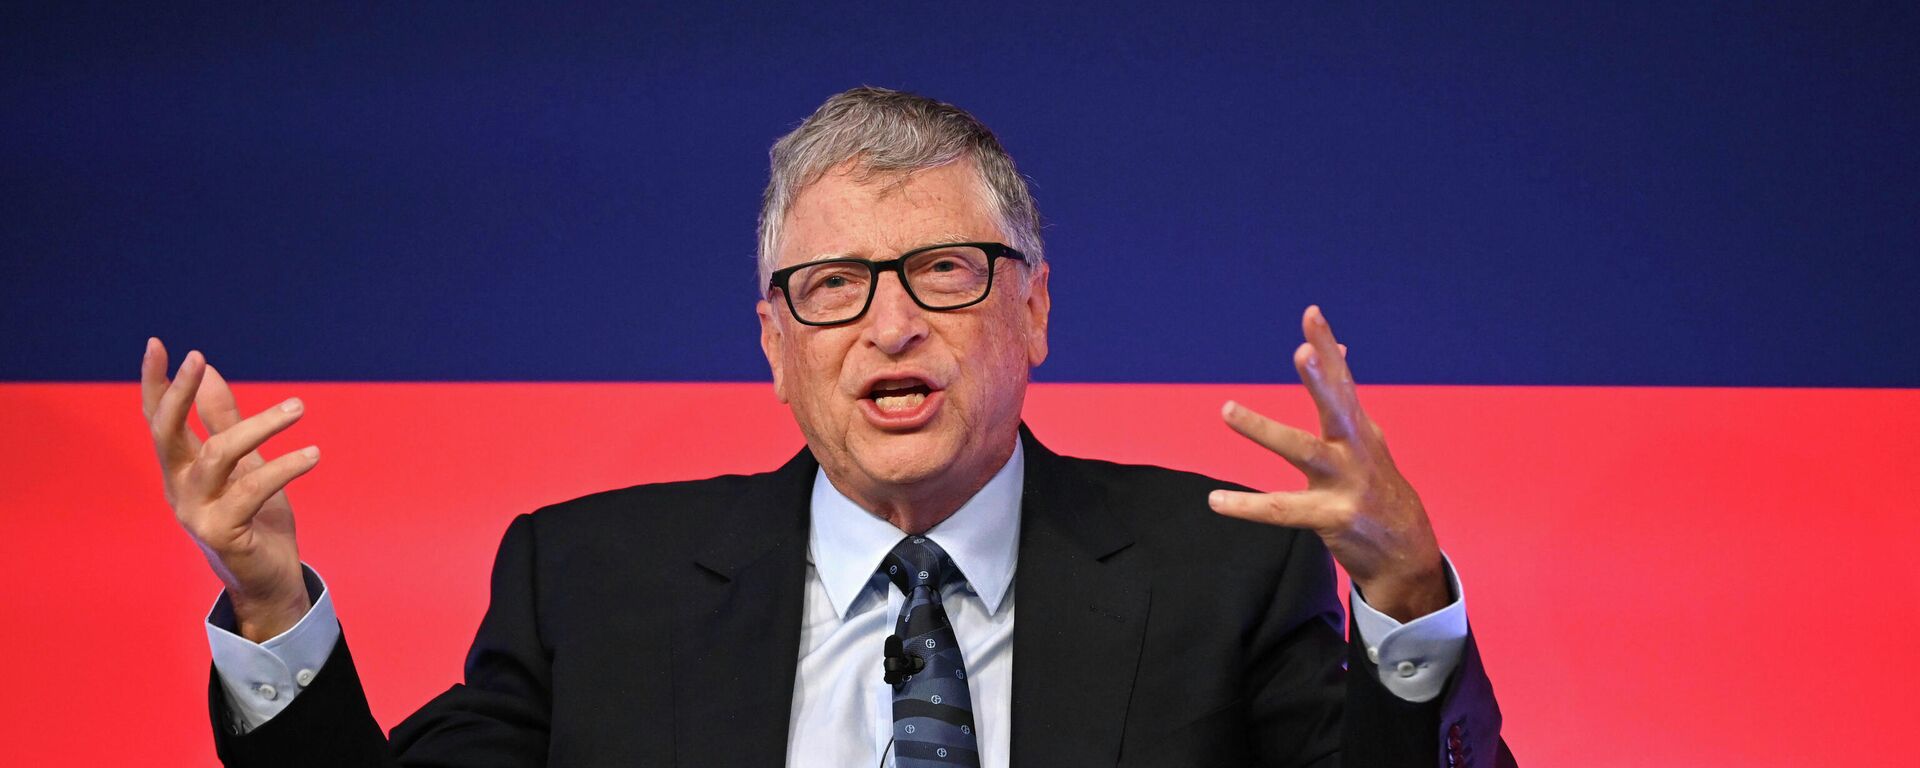 Bill Gates speaks during the Global Investment Summit at the Science Museum, London, Tuesday, Oct, 19, 2021 - Sputnik International, 1920, 01.05.2022